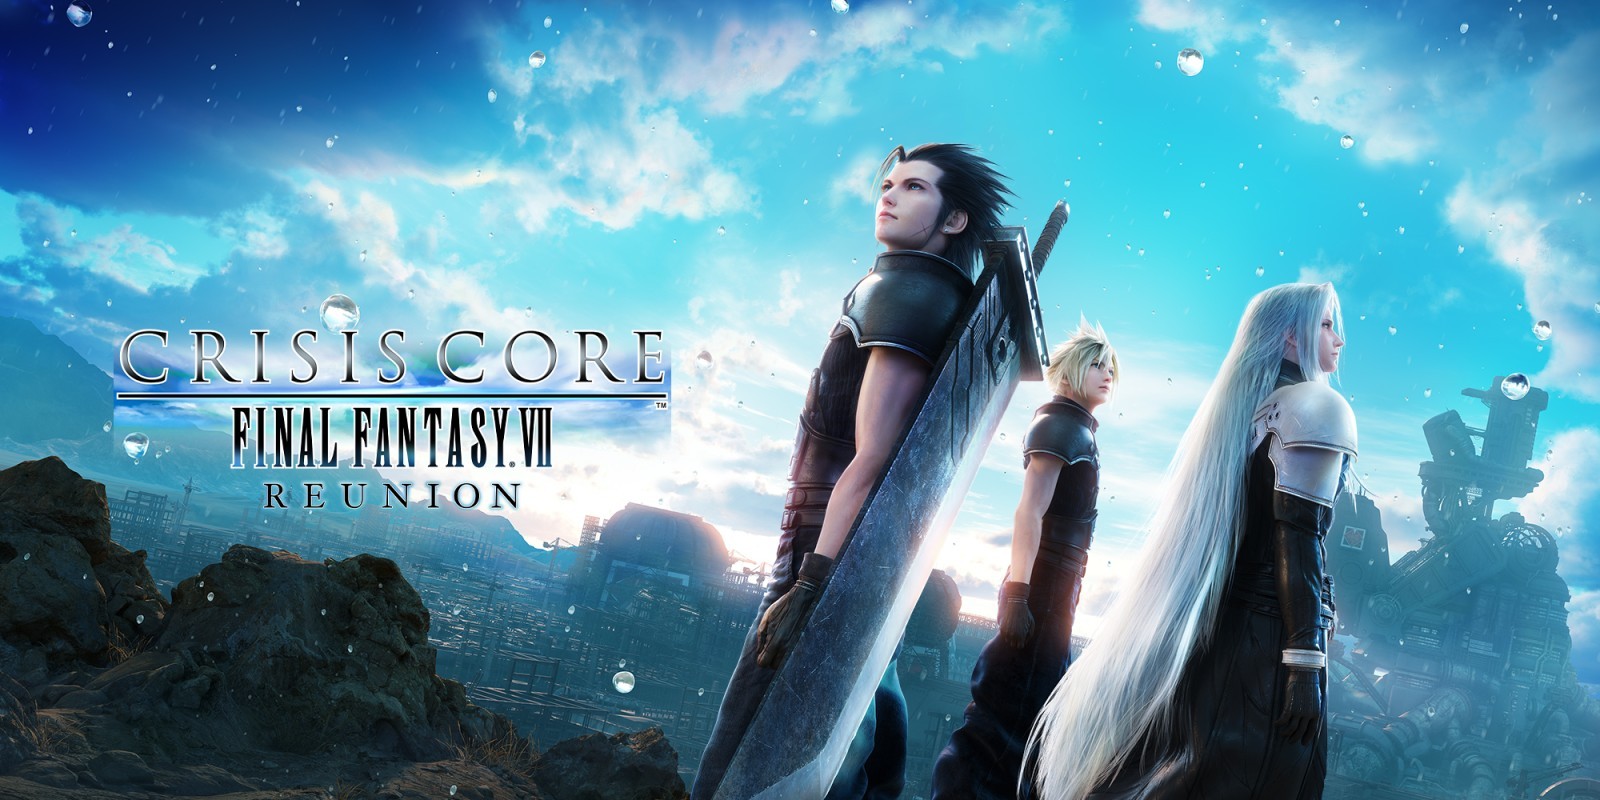 Crisis Core Final Fantasy VII Reunion: here is the complete trophy list!